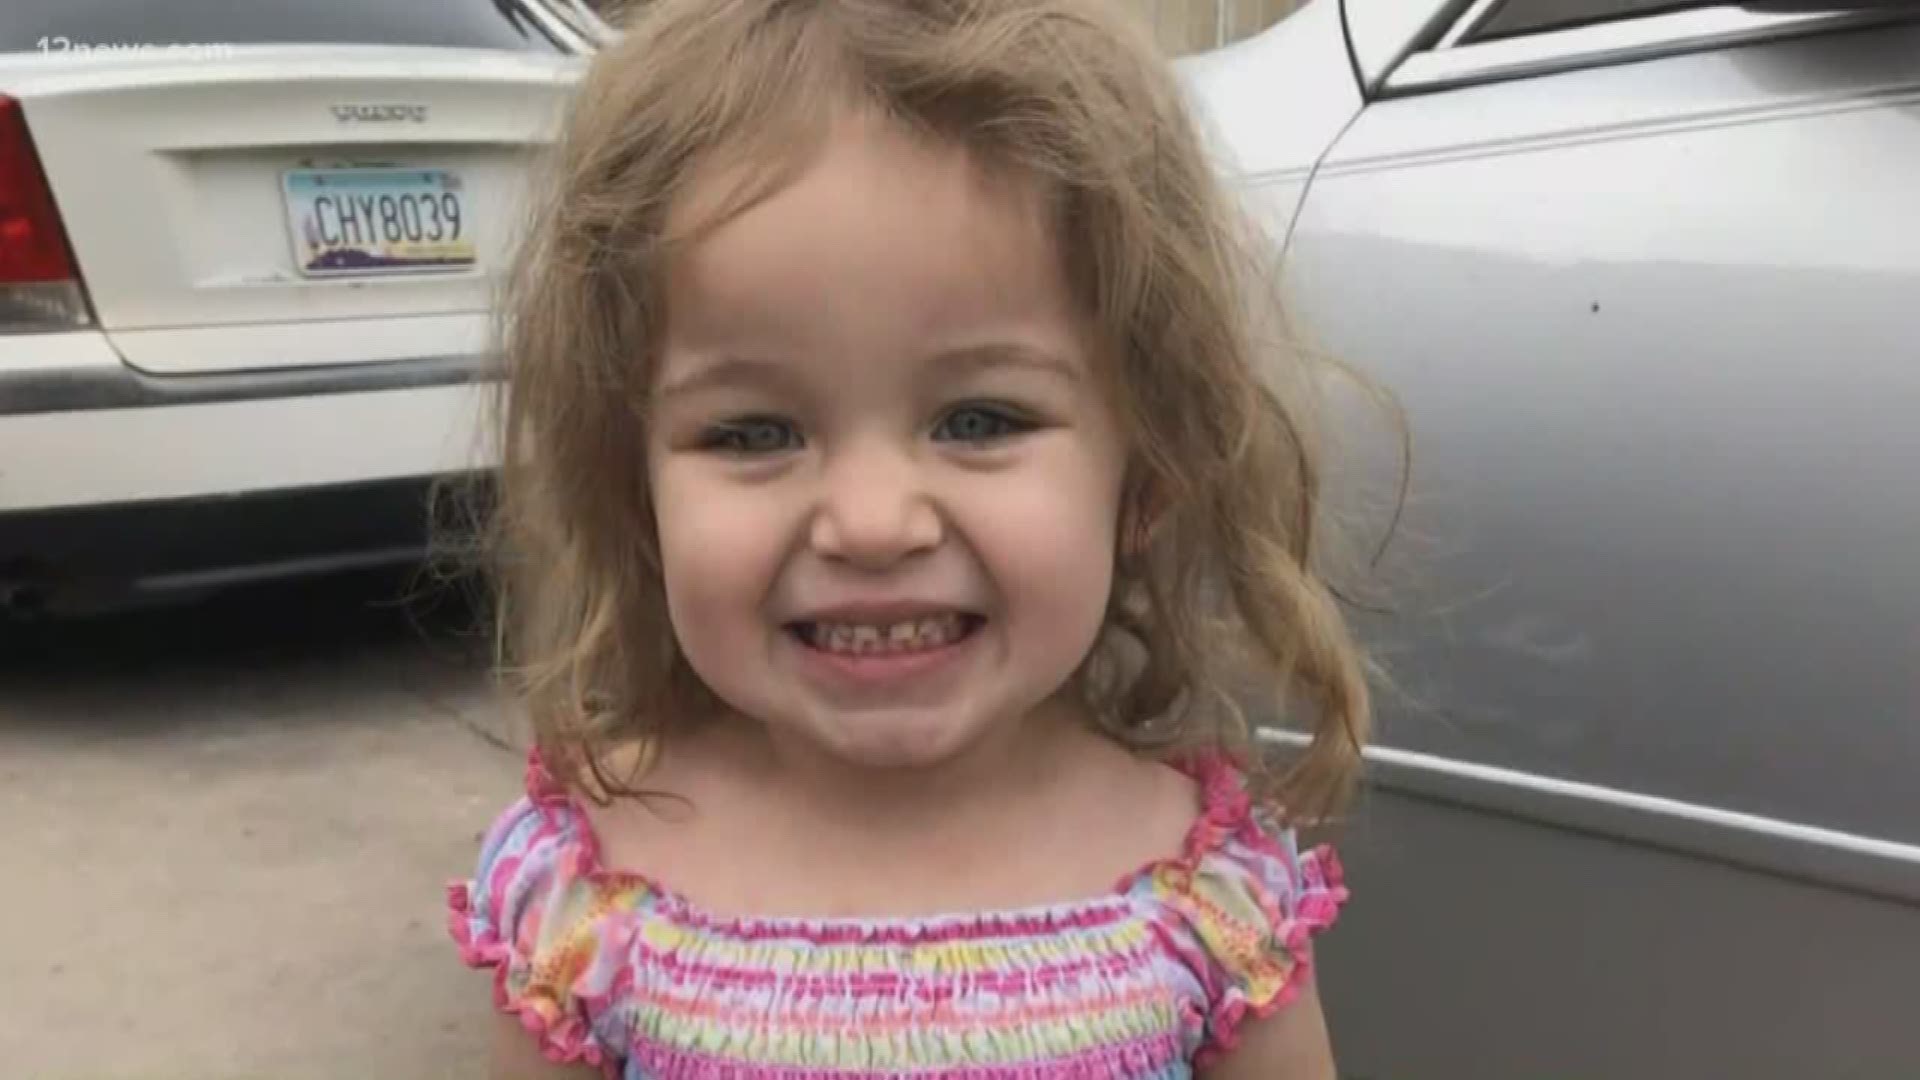 A 2-year-old girl was taken to the hospital Tuesday evening after she was mauled by a dog.